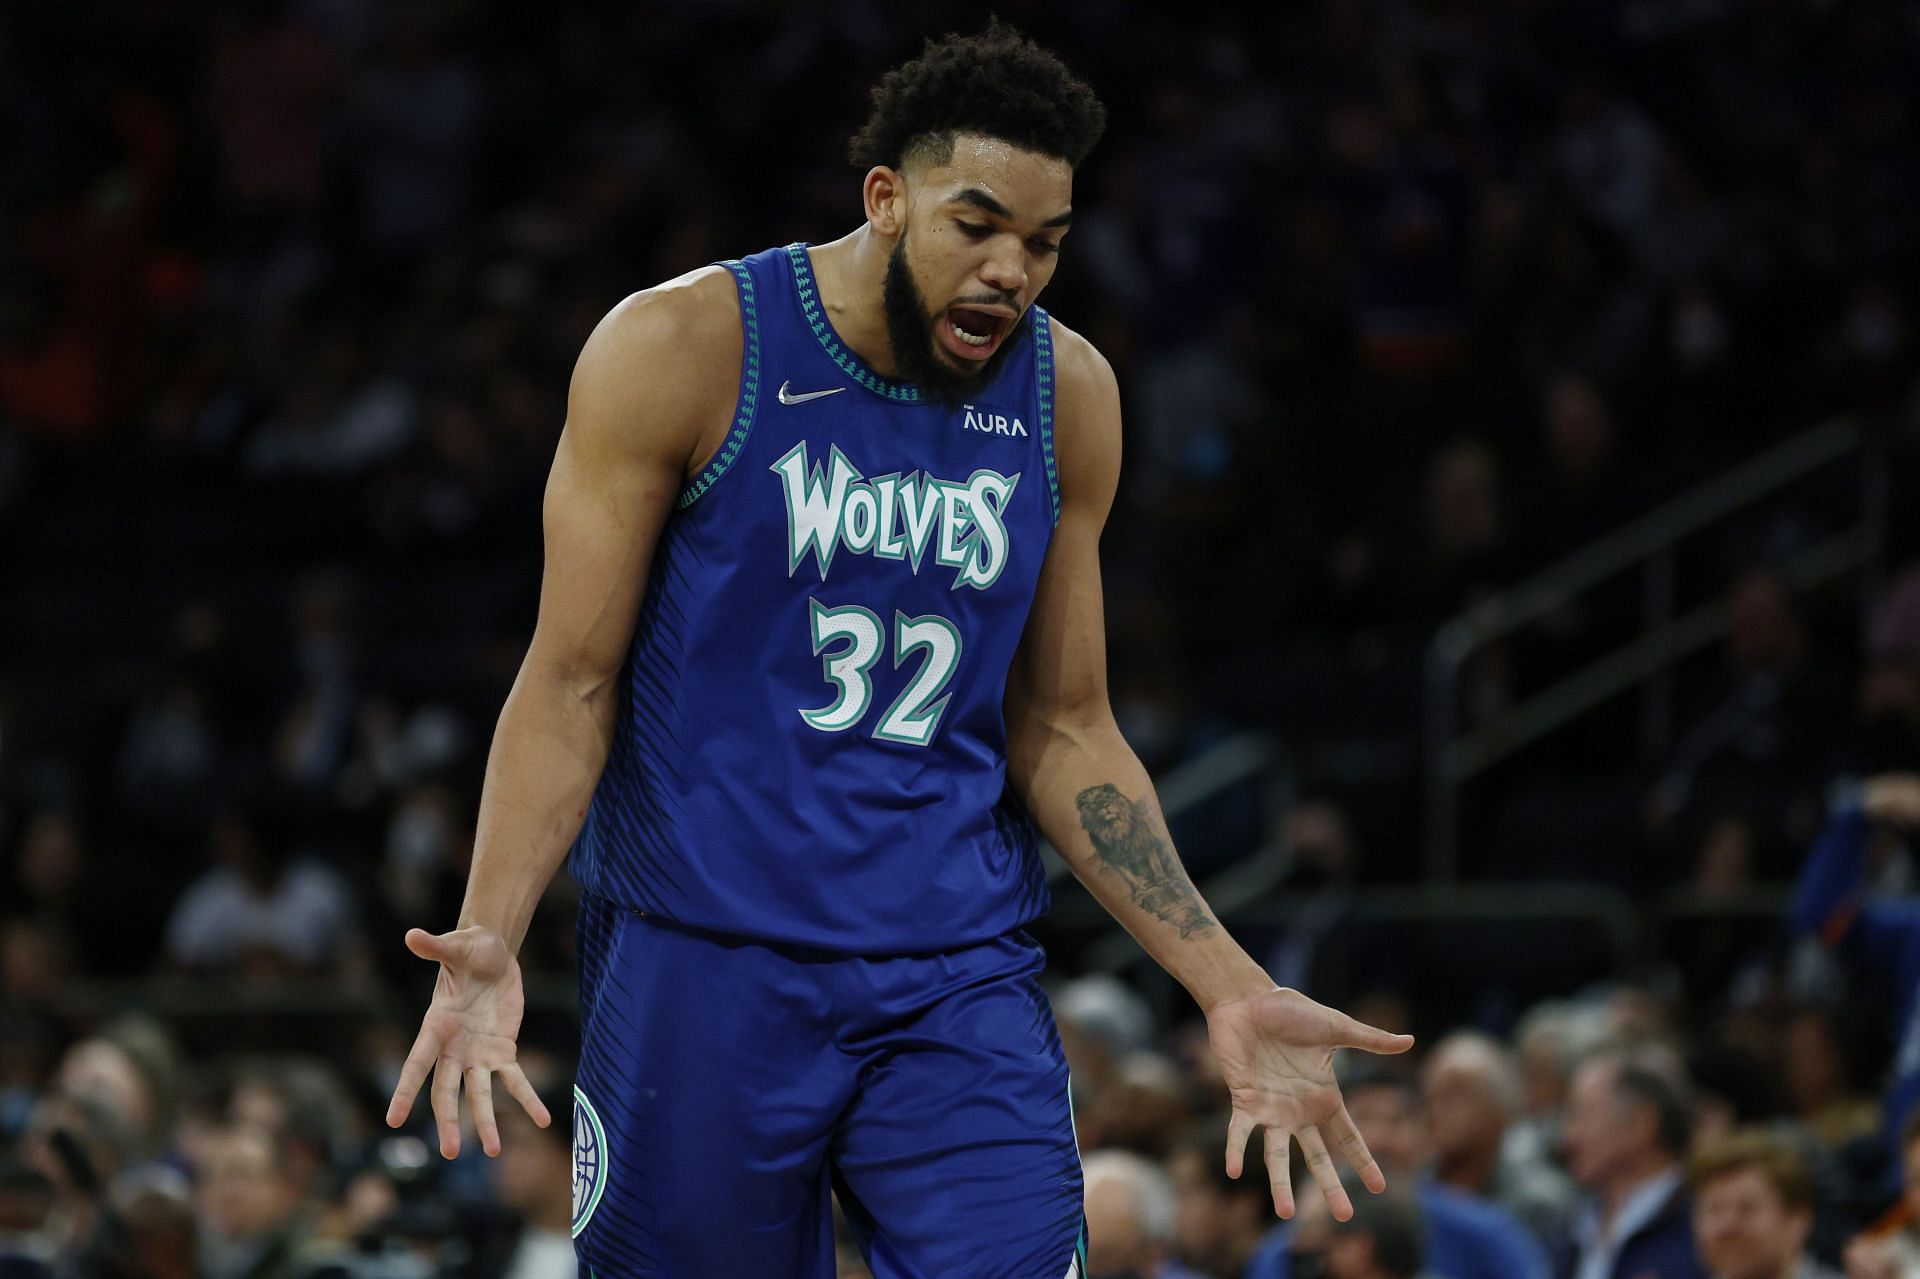 Karl-Anthony Towns reacts to a play.